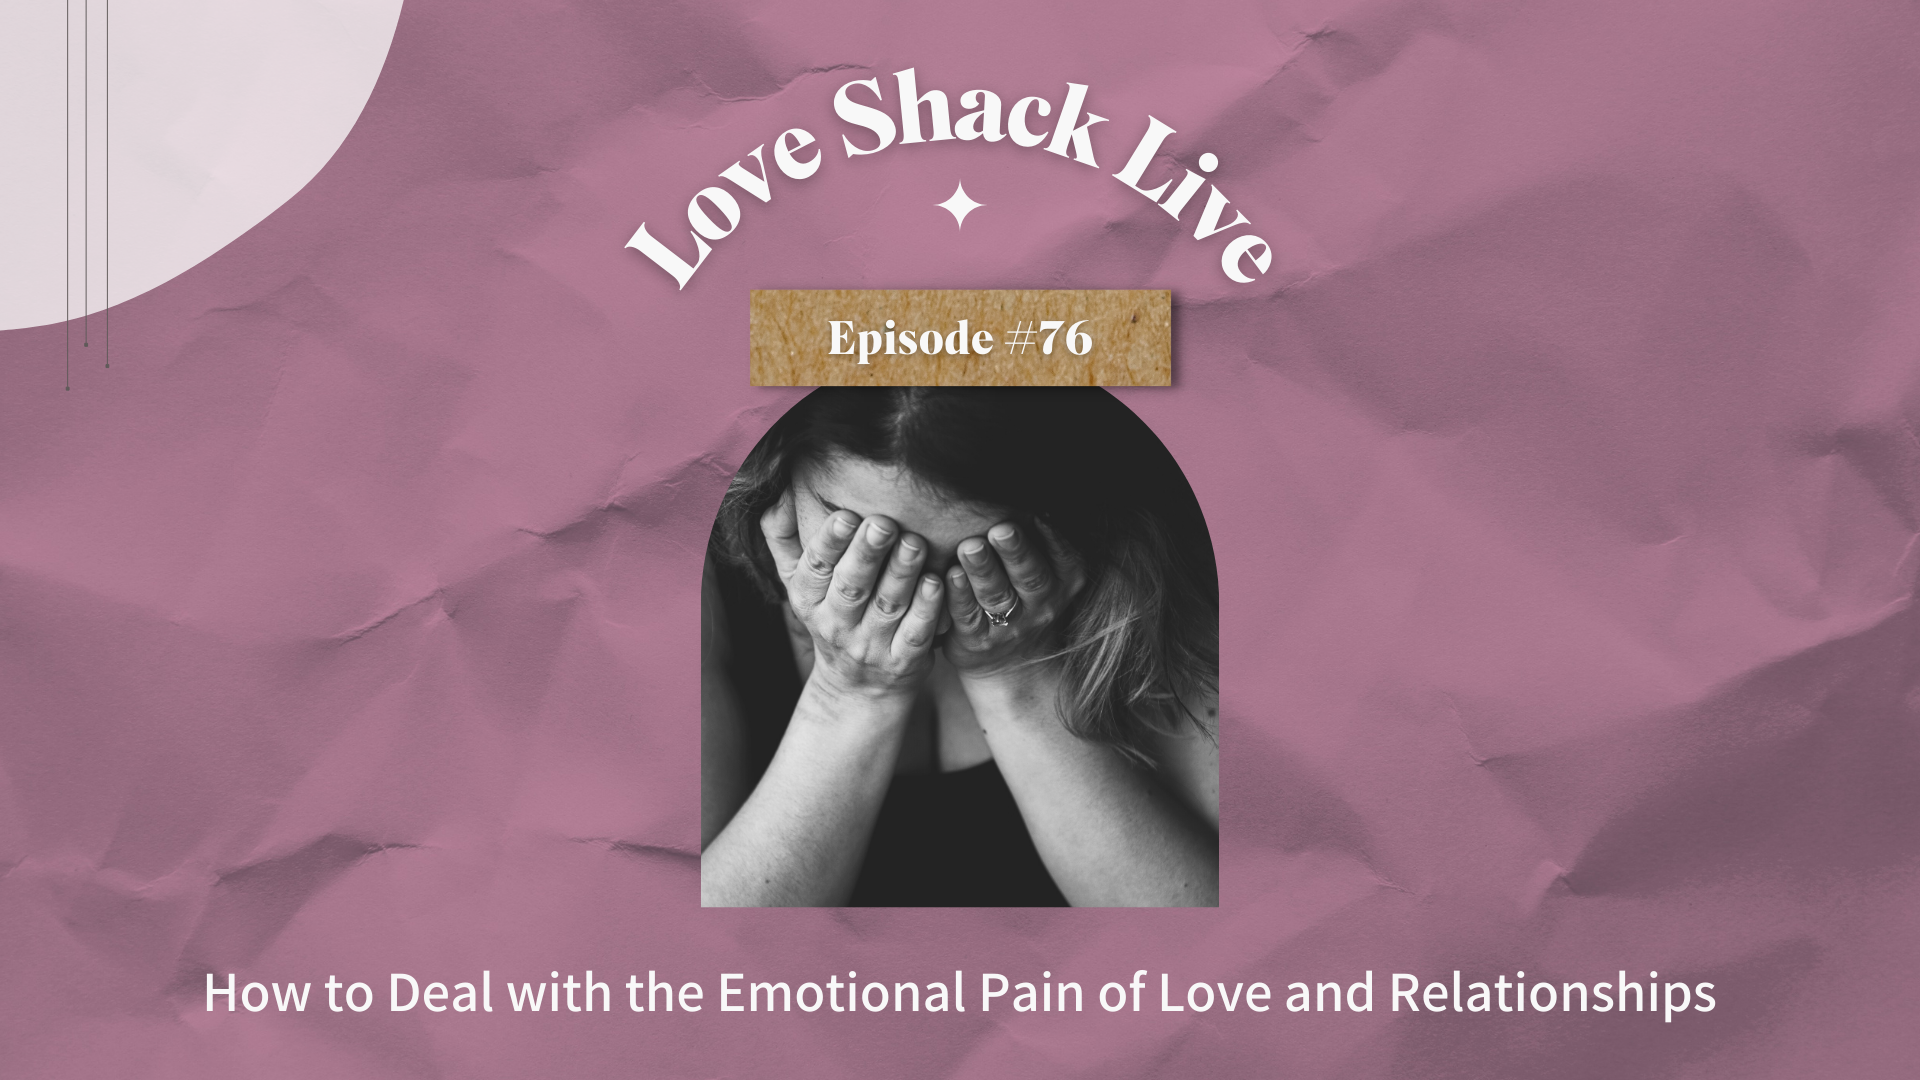 How to Deal with the Emotional Pain of Love and Relationships